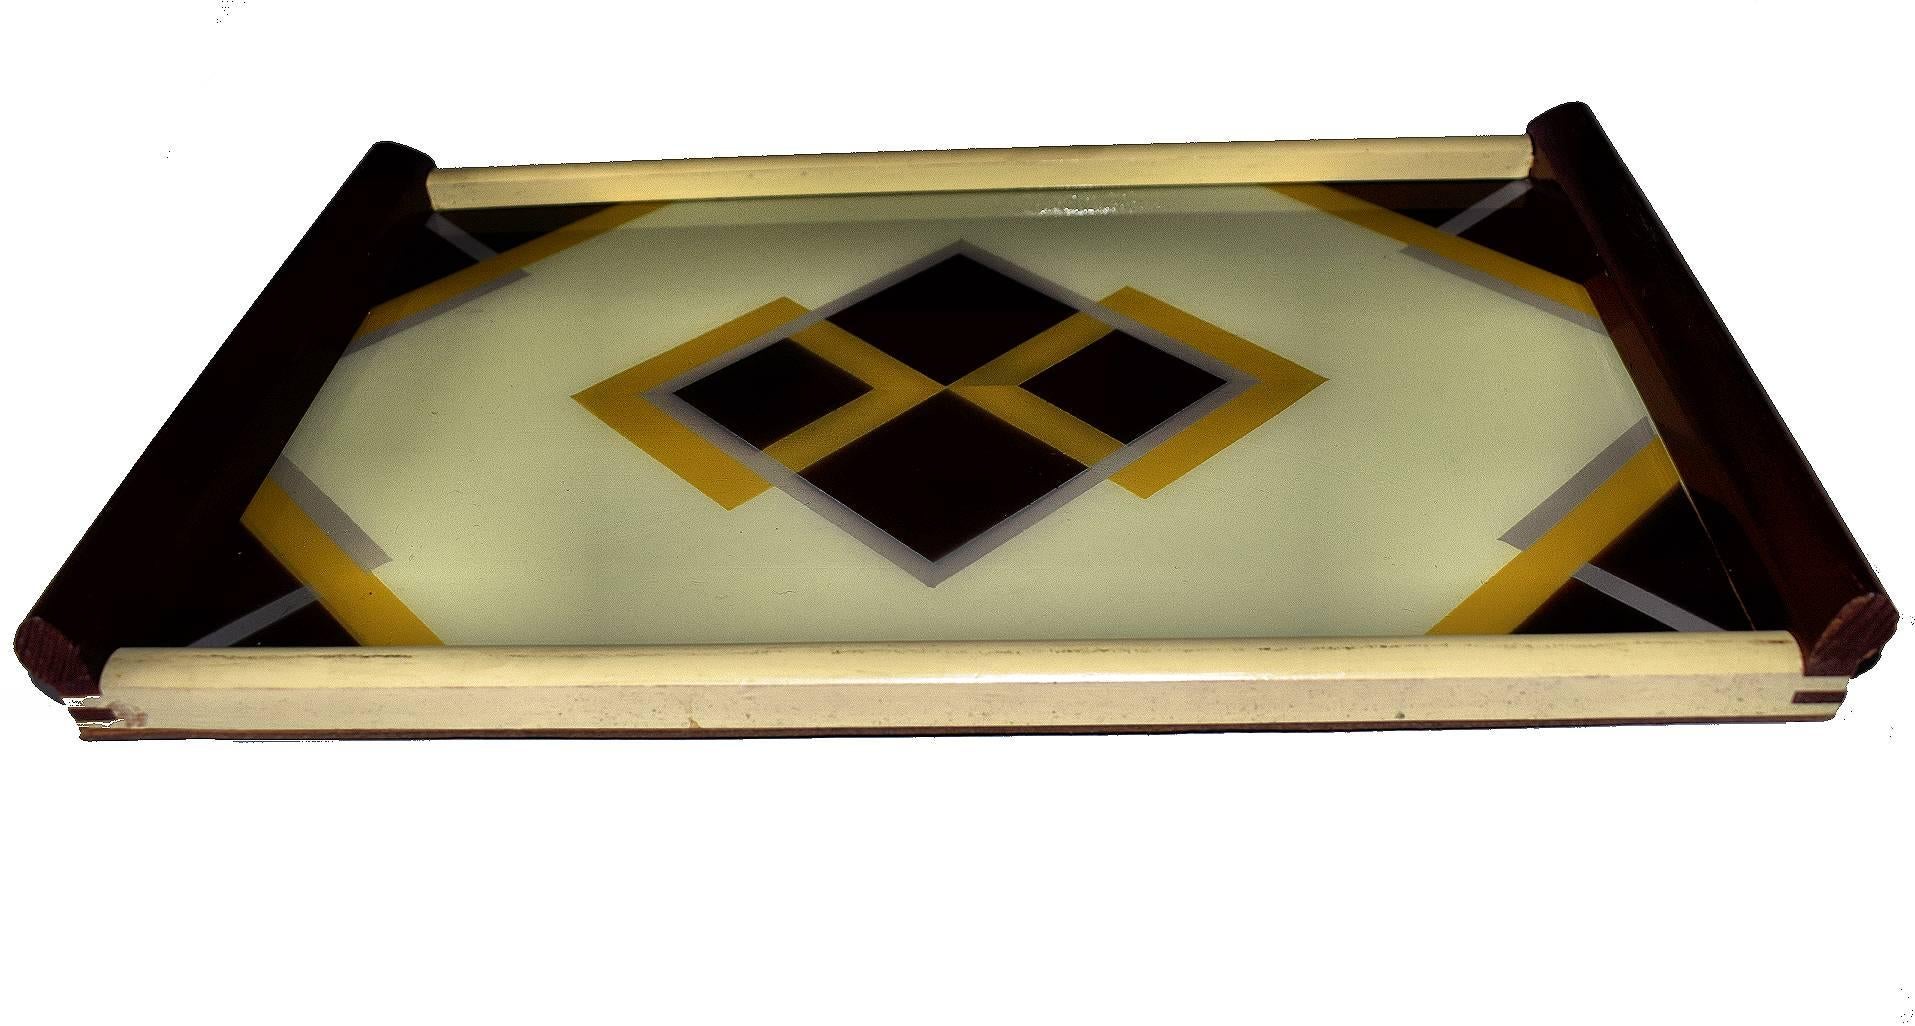 For your consideration is this original 1930s German Art Deco tray featuring a lovely reverse painted design on glass. Condition is very good. Very distinctive Deco motif. Ideal for displaying your barware or serving cocktails!